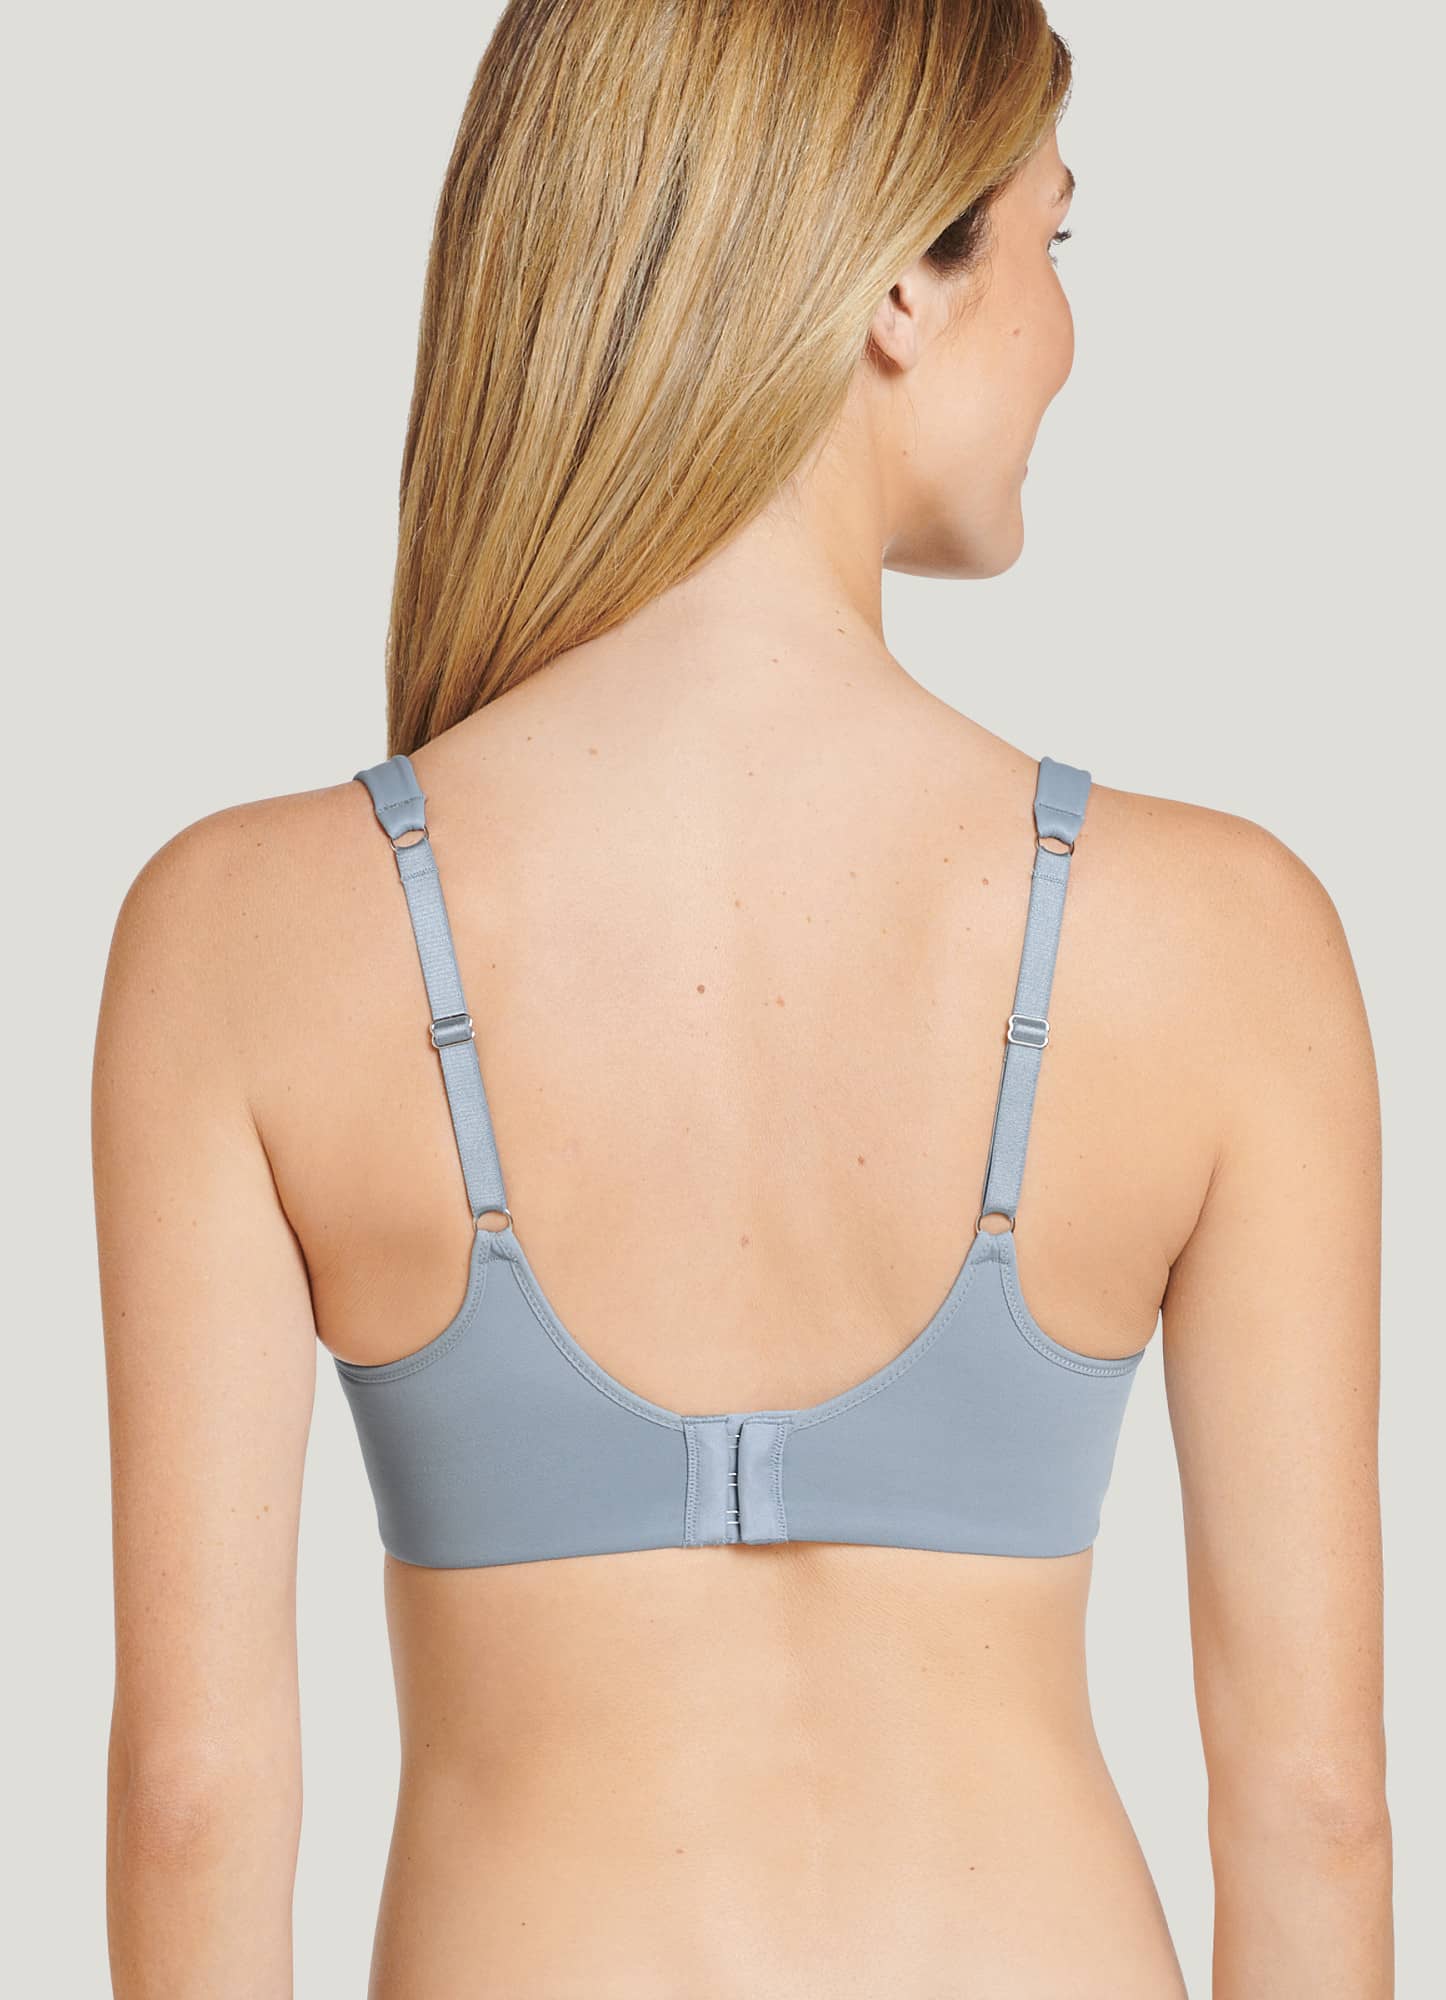 I'm 5'10, 210 lbs and a size 16, I found the perfect sports bras for a  wide back and they eliminate any 'lumpy' bits